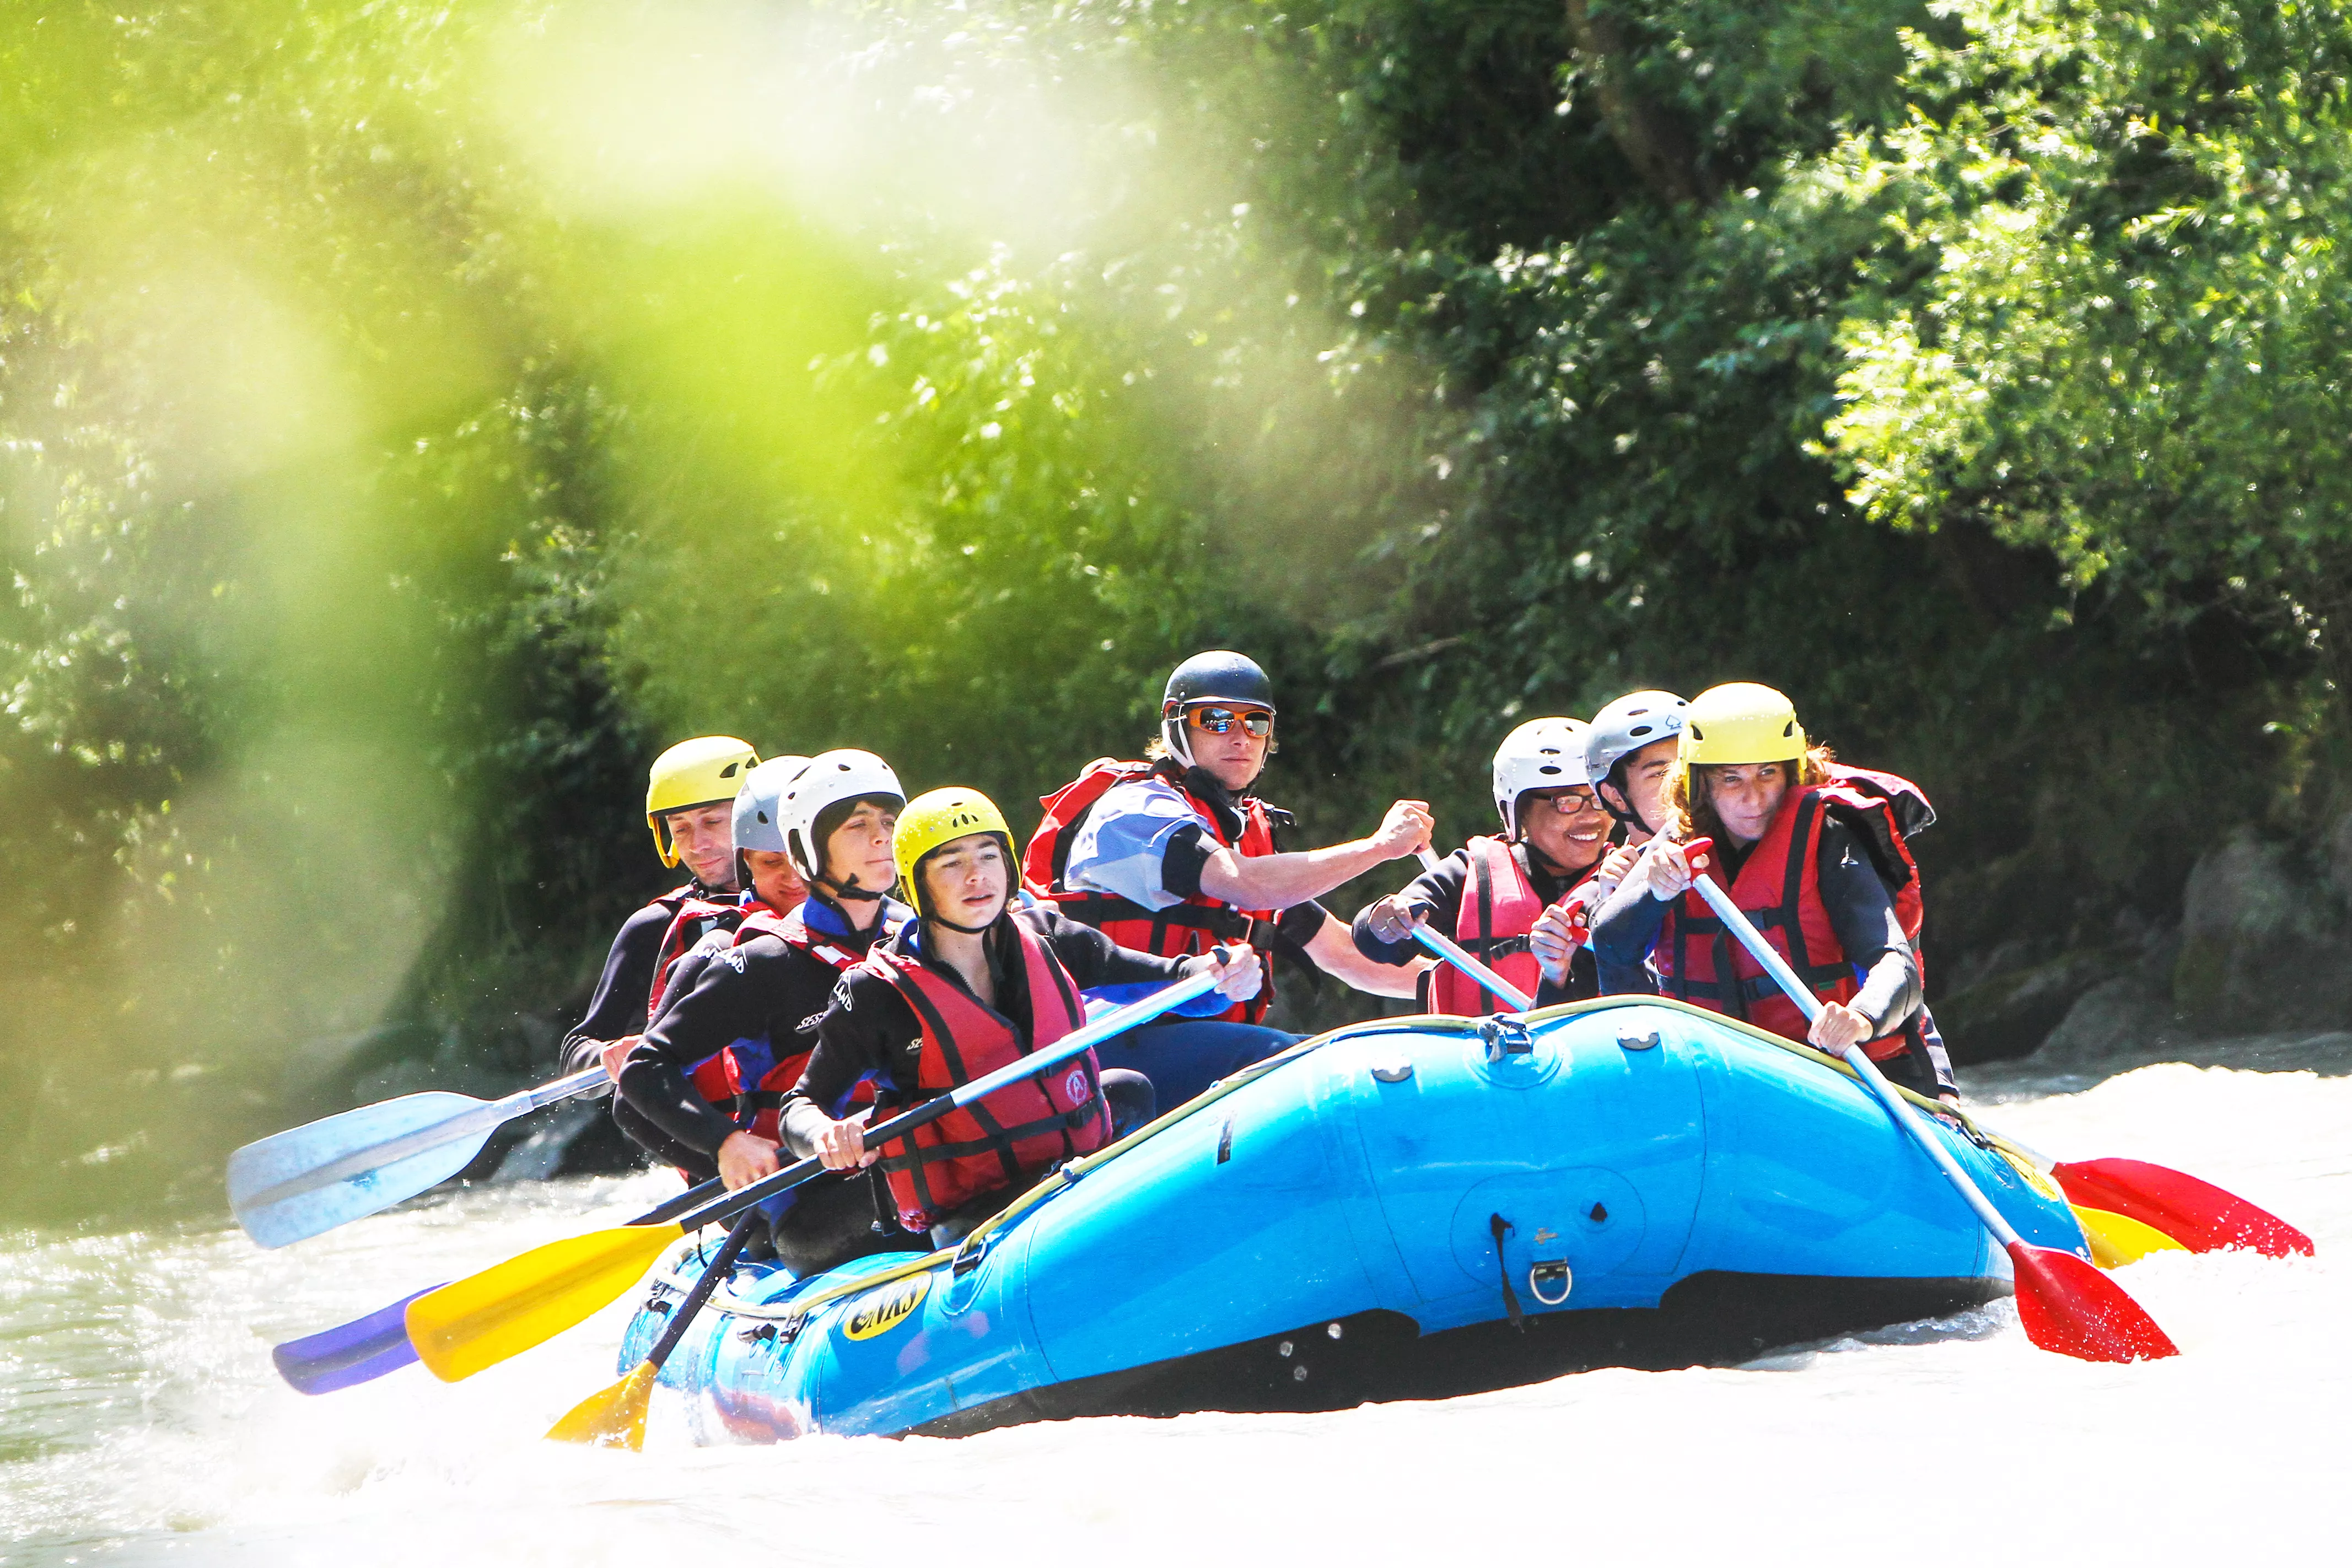 Session Raft Chamonix in France, Europe | Rafting - Rated 0.9